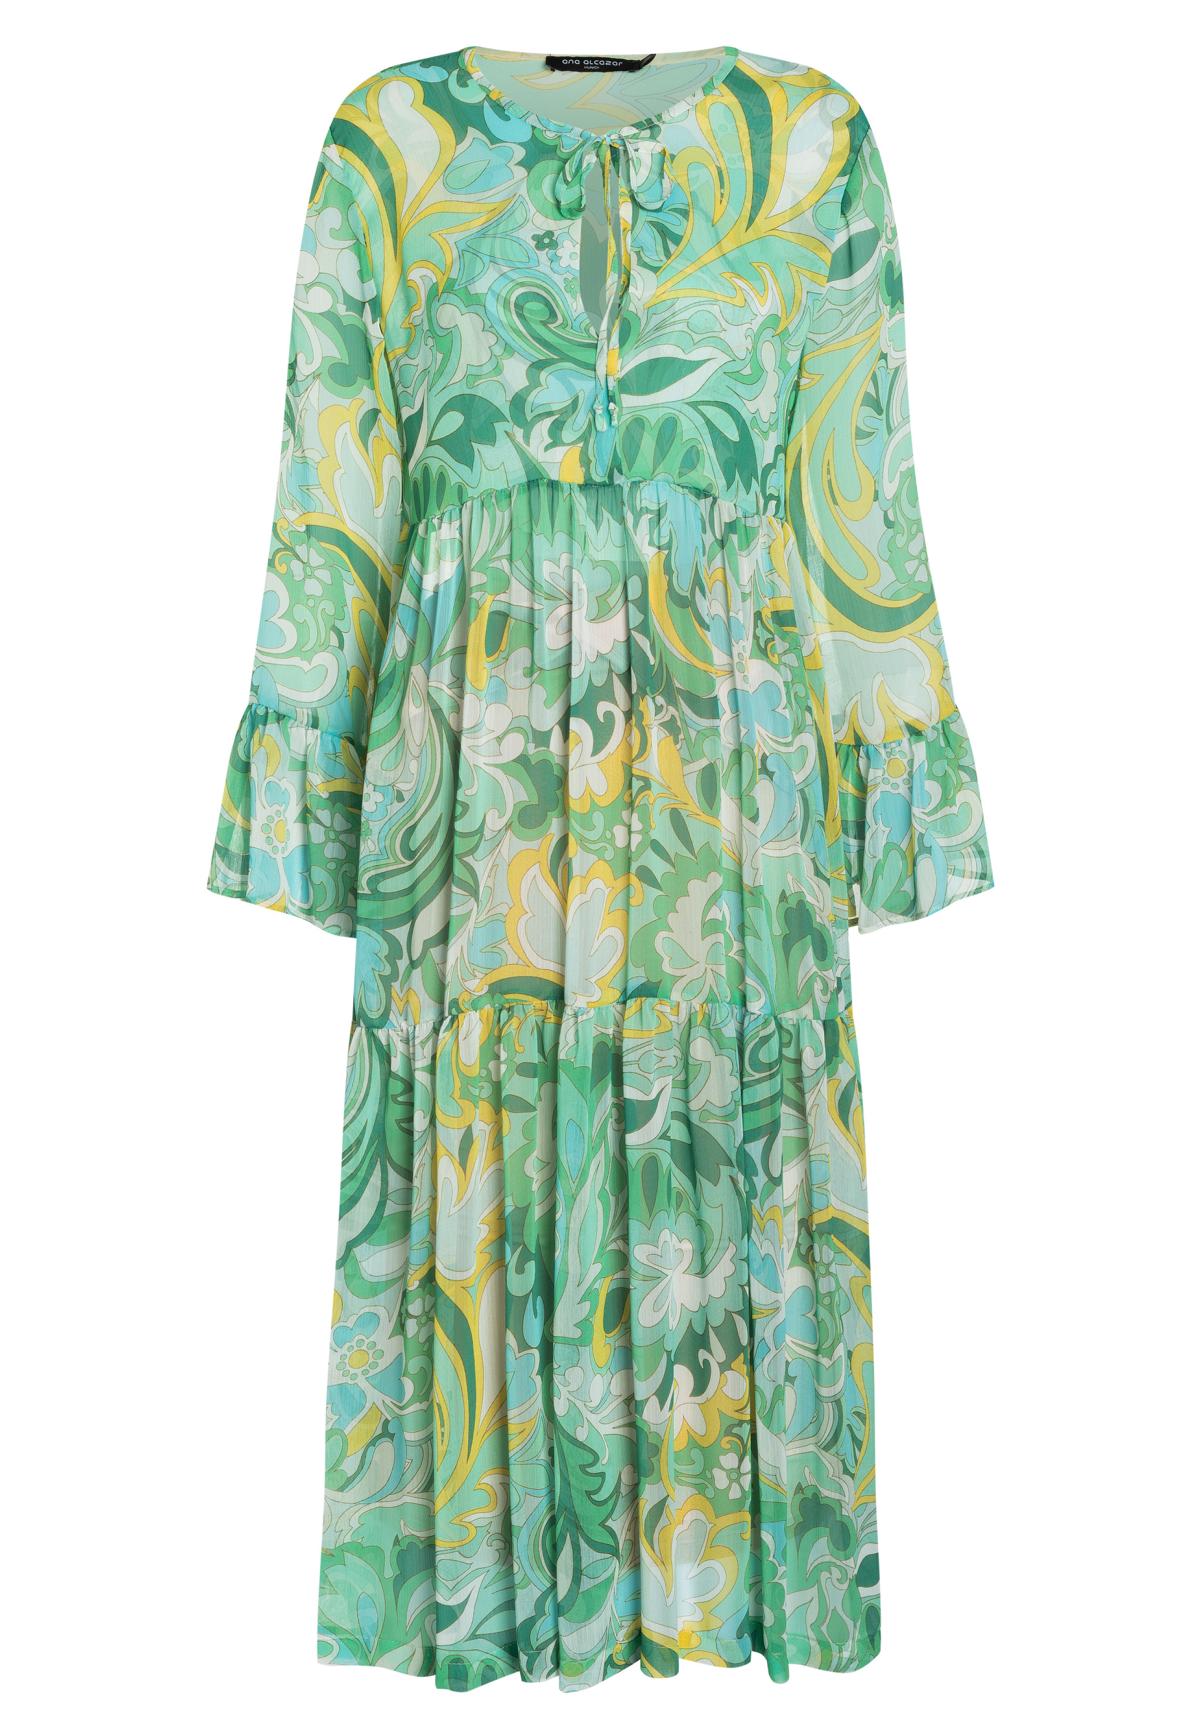 Wide empire dress Dianes with 3/4 sleeve in lightblue, green & yellow ...